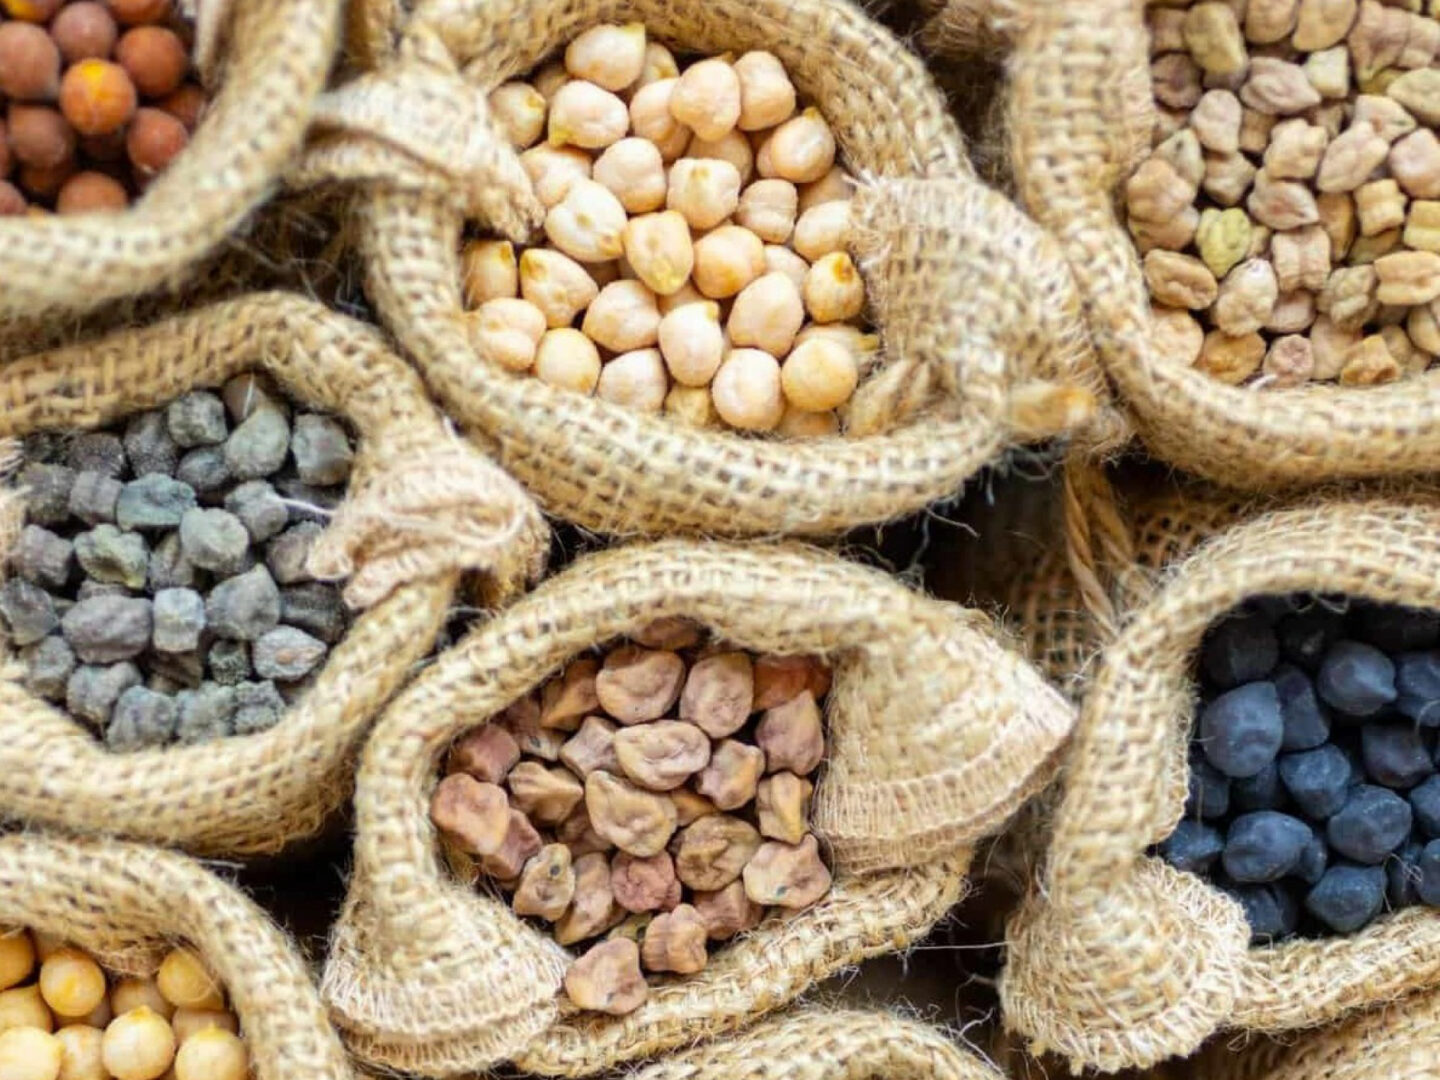 A photo showing burlap sacks of different lentils and legumes; image courtesy of nucicer